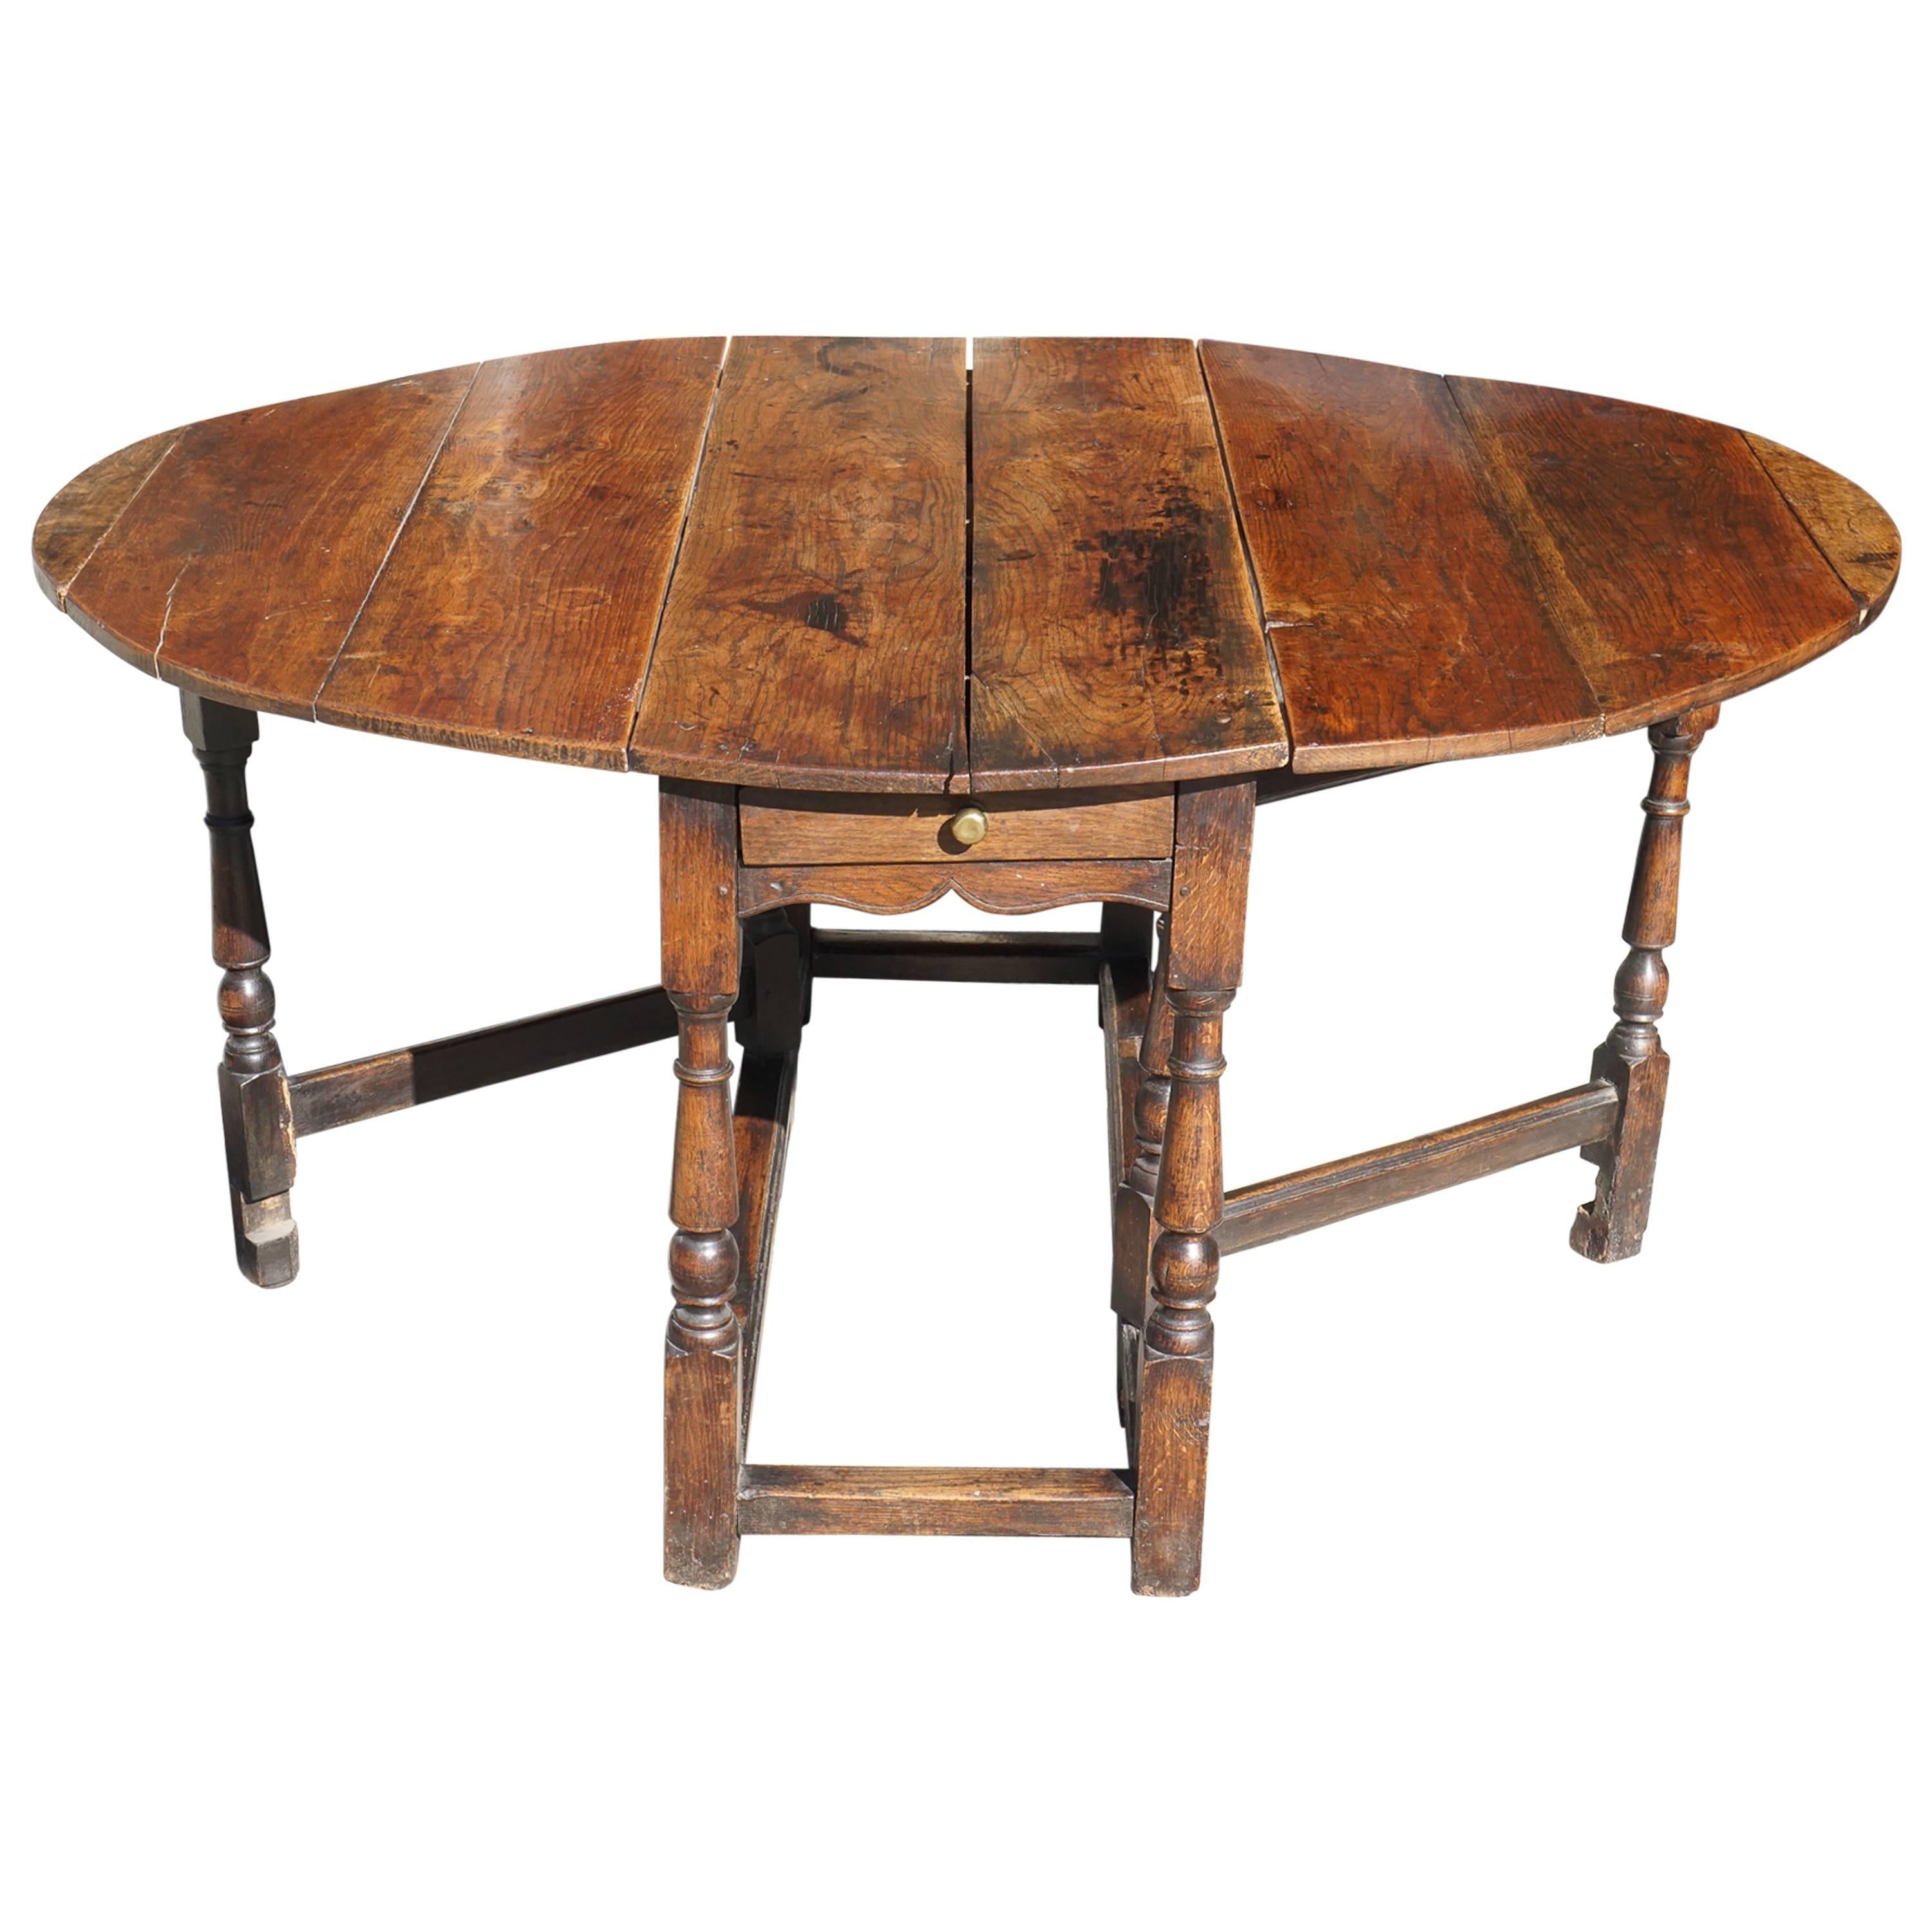 English Late 18th Century Oval Yew Wood Drop-Leaf Dinning Table